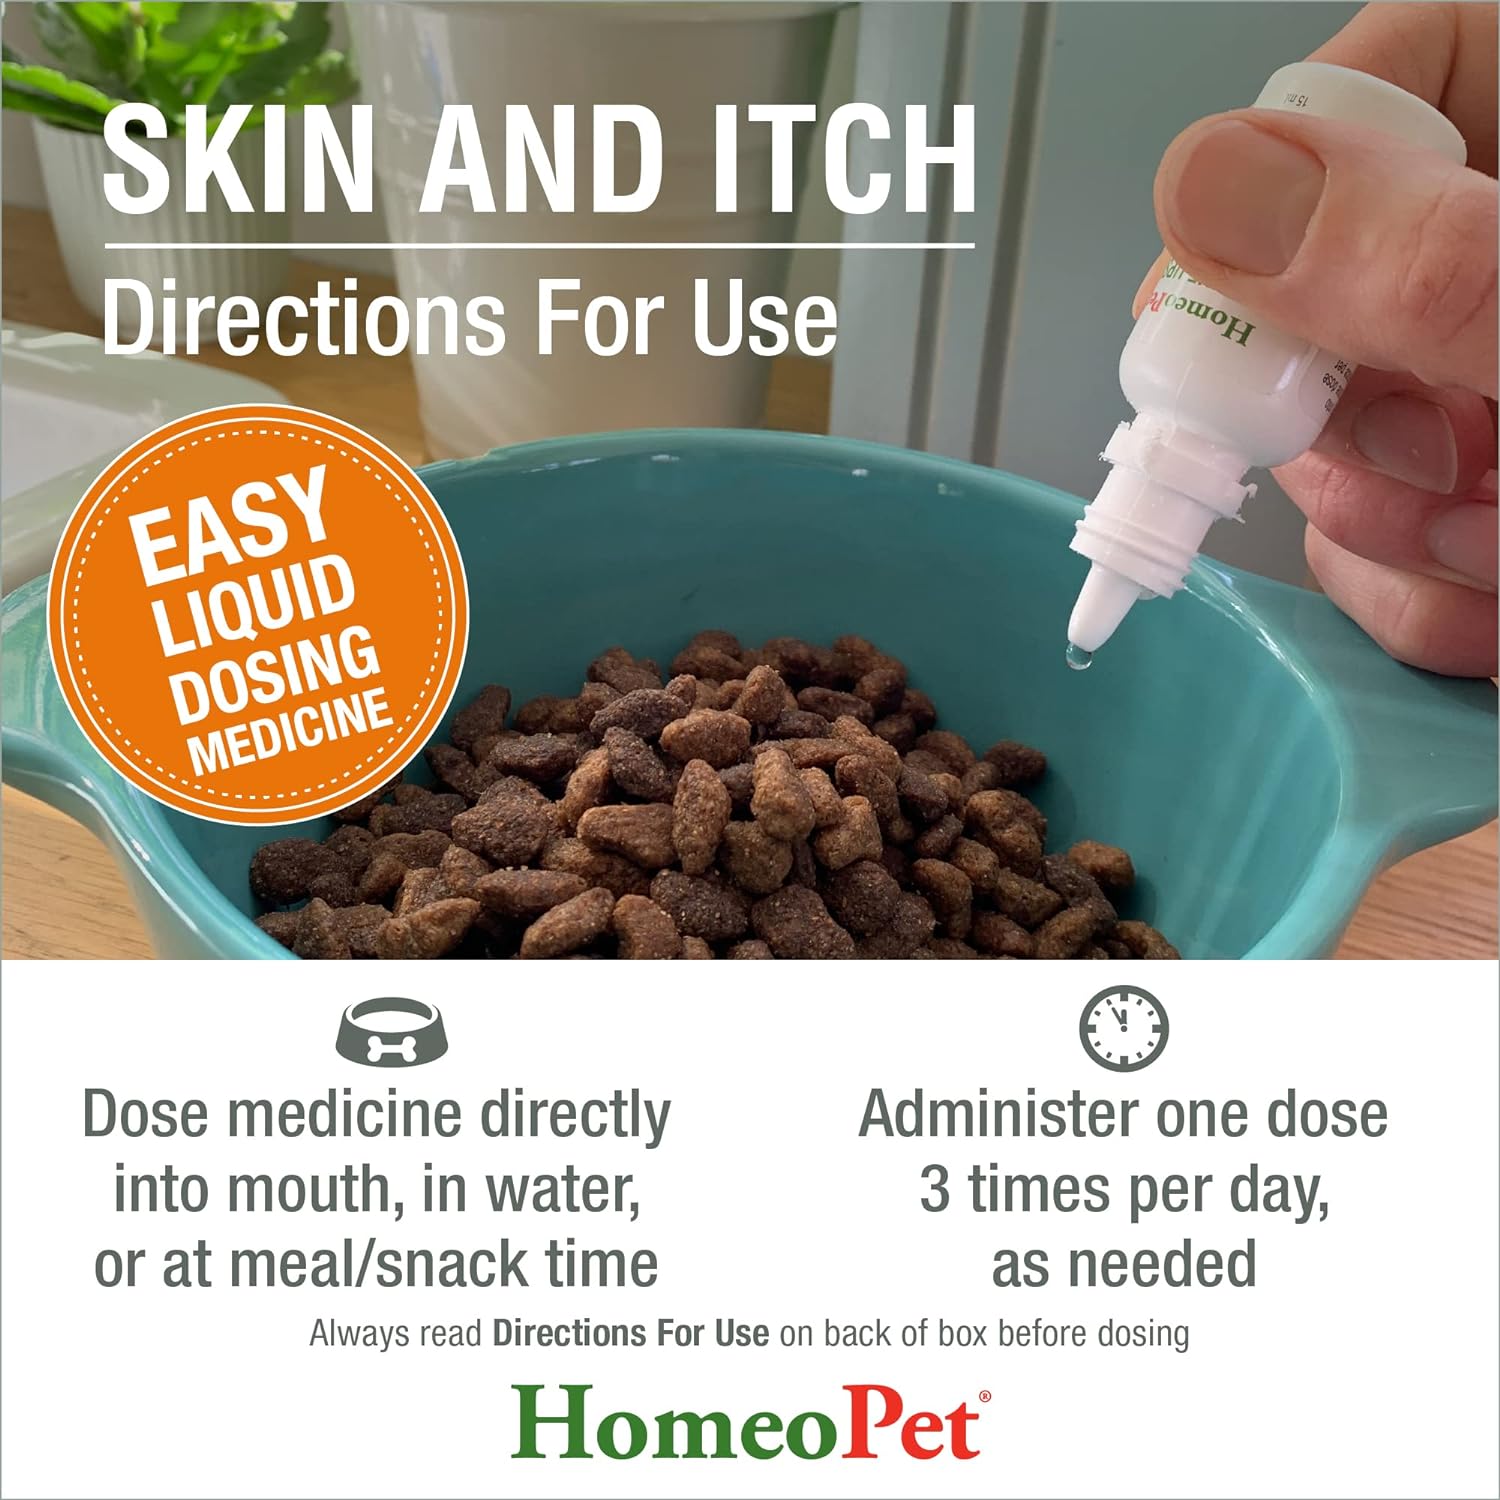 HomeoPet Skin and Itch, Safe and Natural Itch Relief for Dogs and Cats, Coat and Skin Soother for Pets, 15 Milliliters : Pet Itch Remedies : Pet Supplies